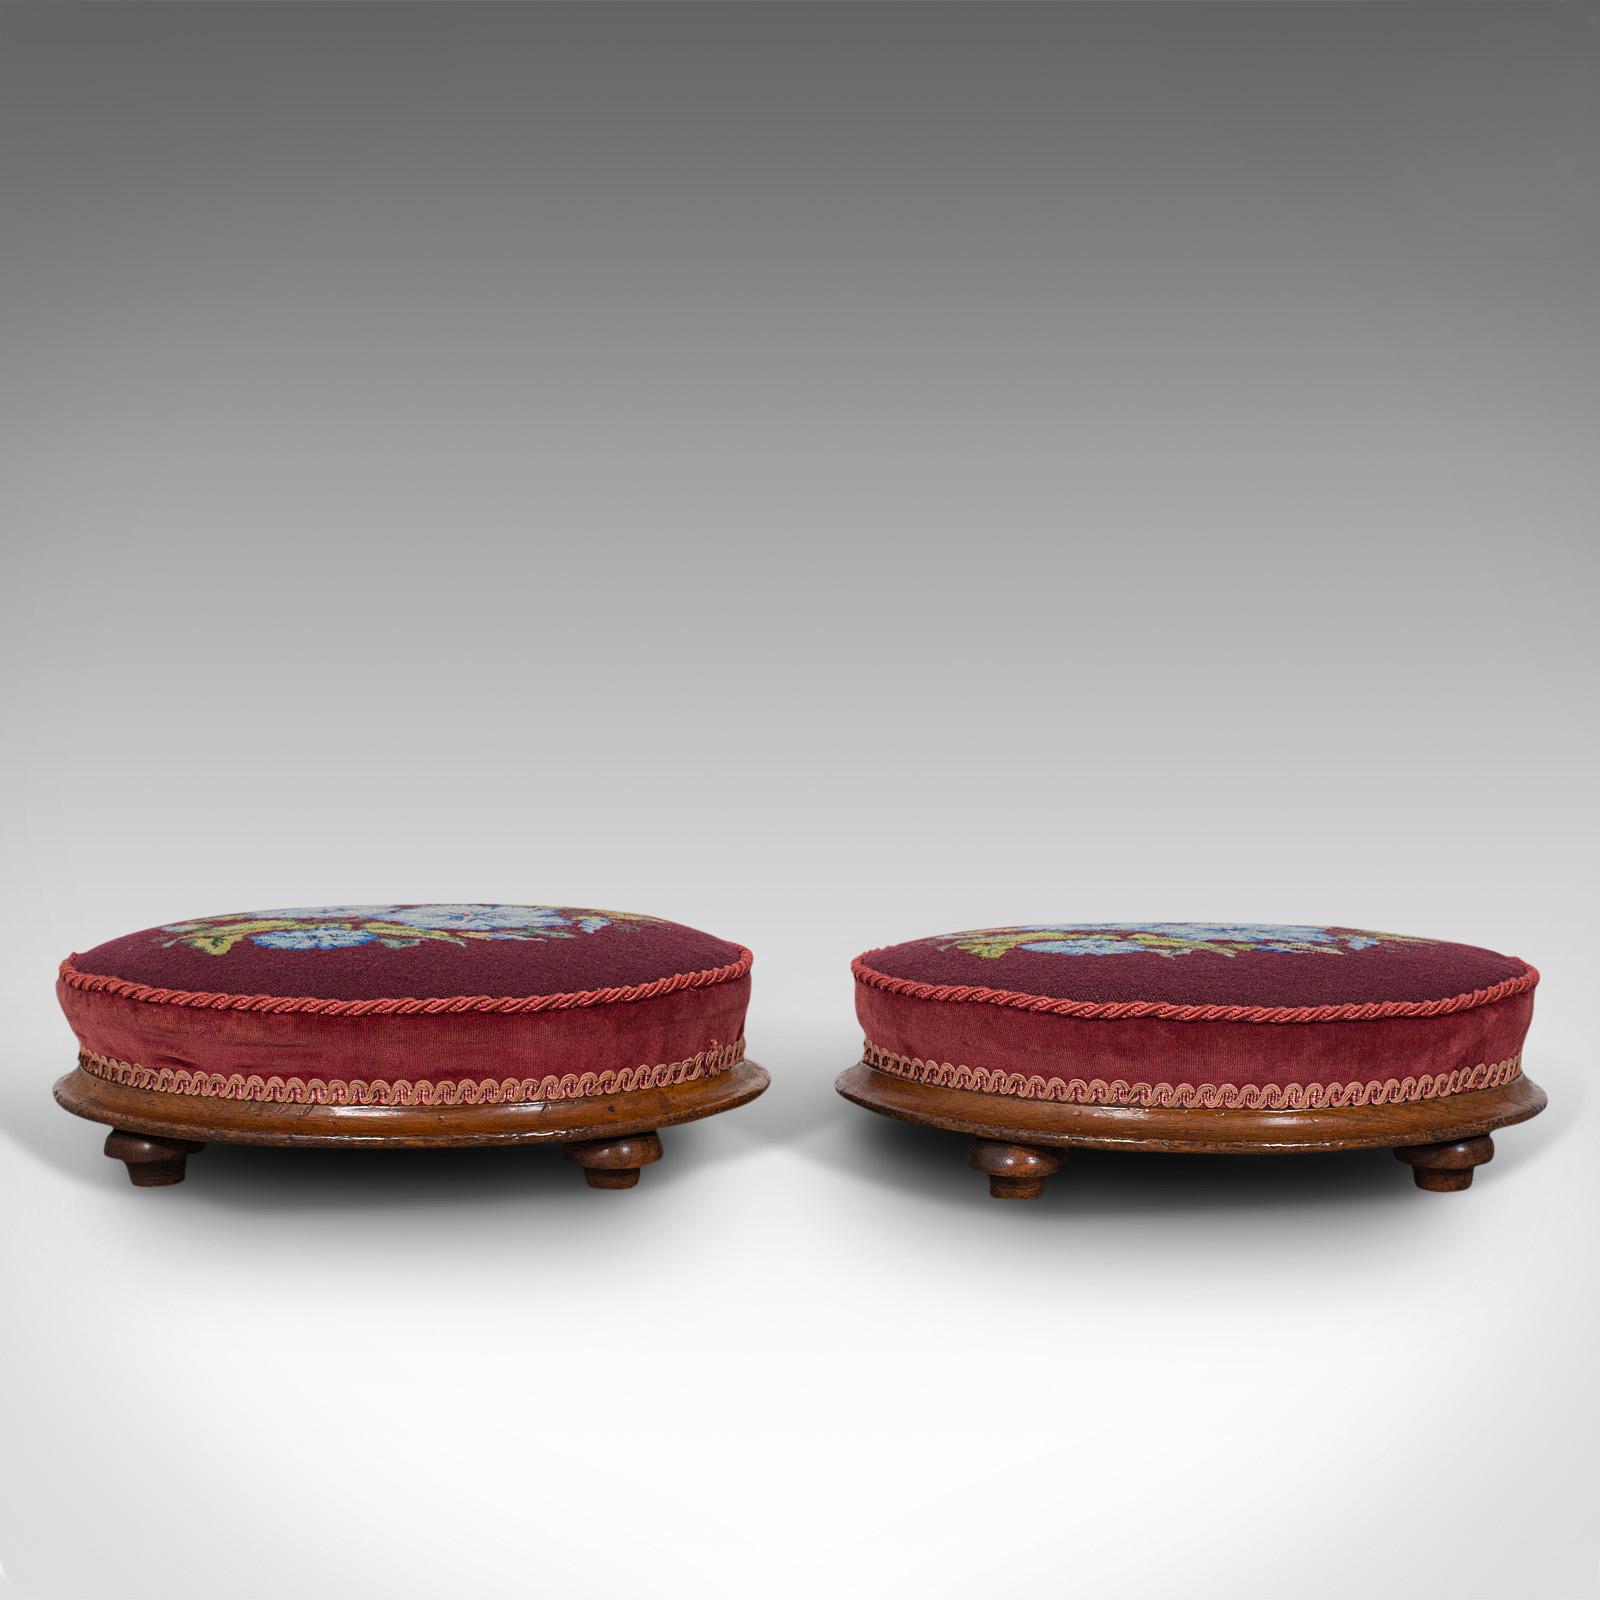 This is a pair of antique footstools. An English, walnut and needlepoint rest, dating to the mid Victorian period, circa 1860.

Of generous size for resting one's feet
Displaying a desirable aged patina, in very good order
Walnut bases show fine